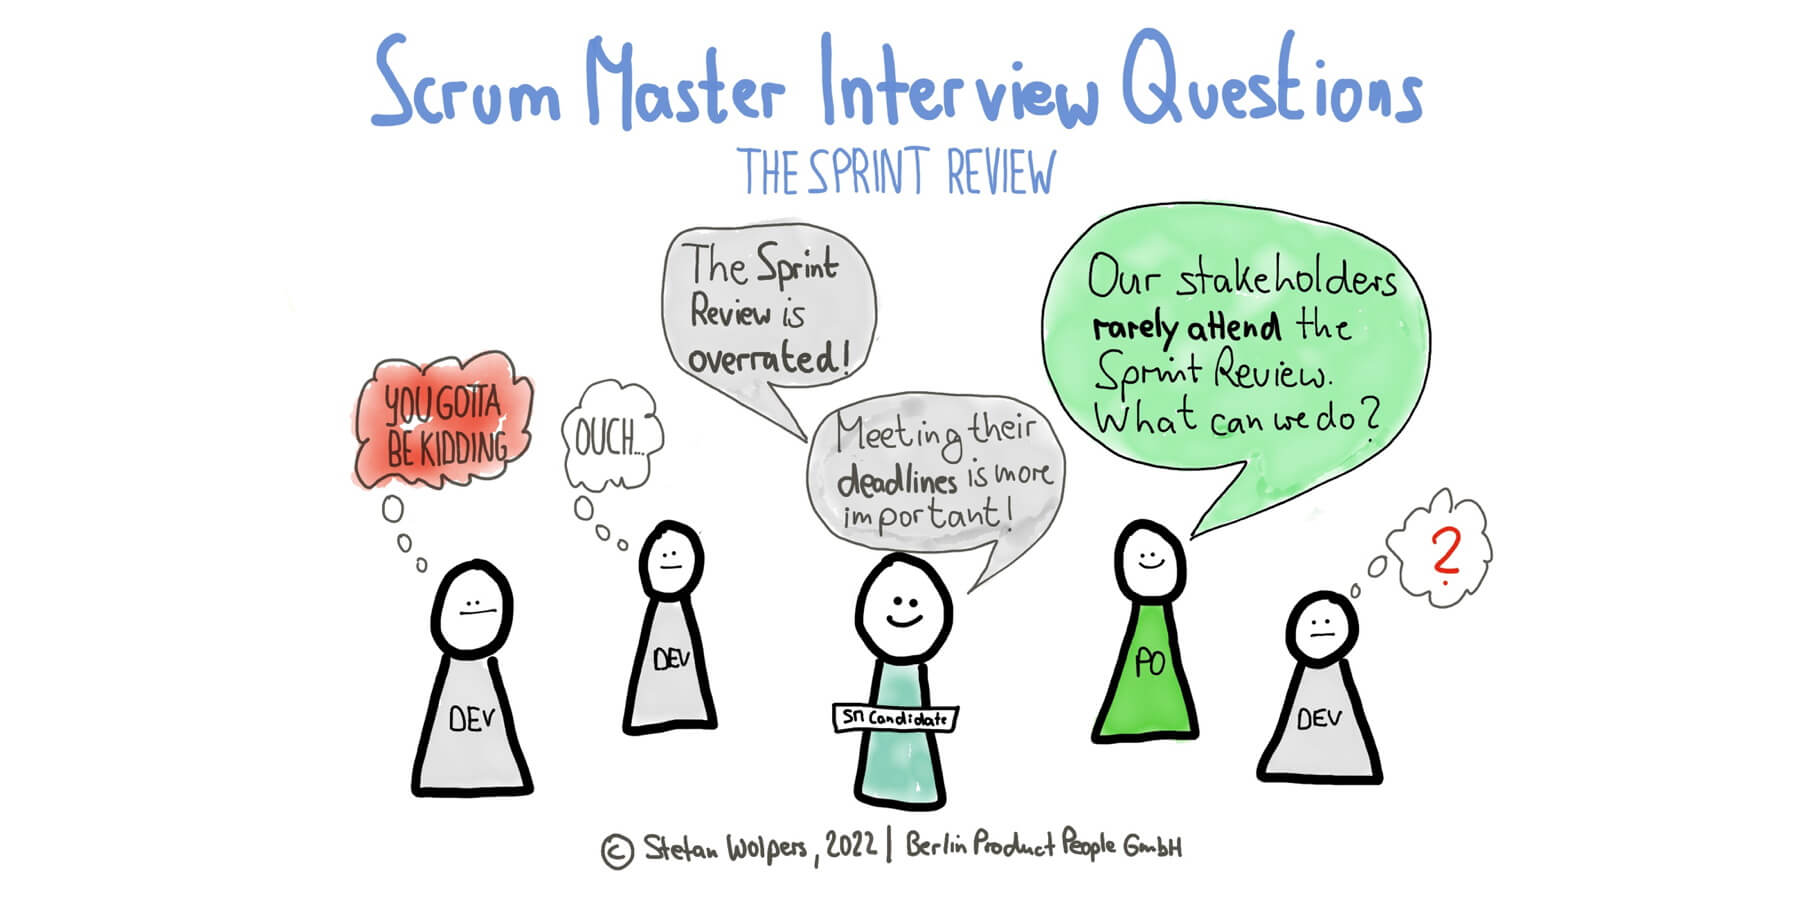 66 Scrum Master Interview Questions to Identify Suitable Candidates — Berlin Product People GmbH